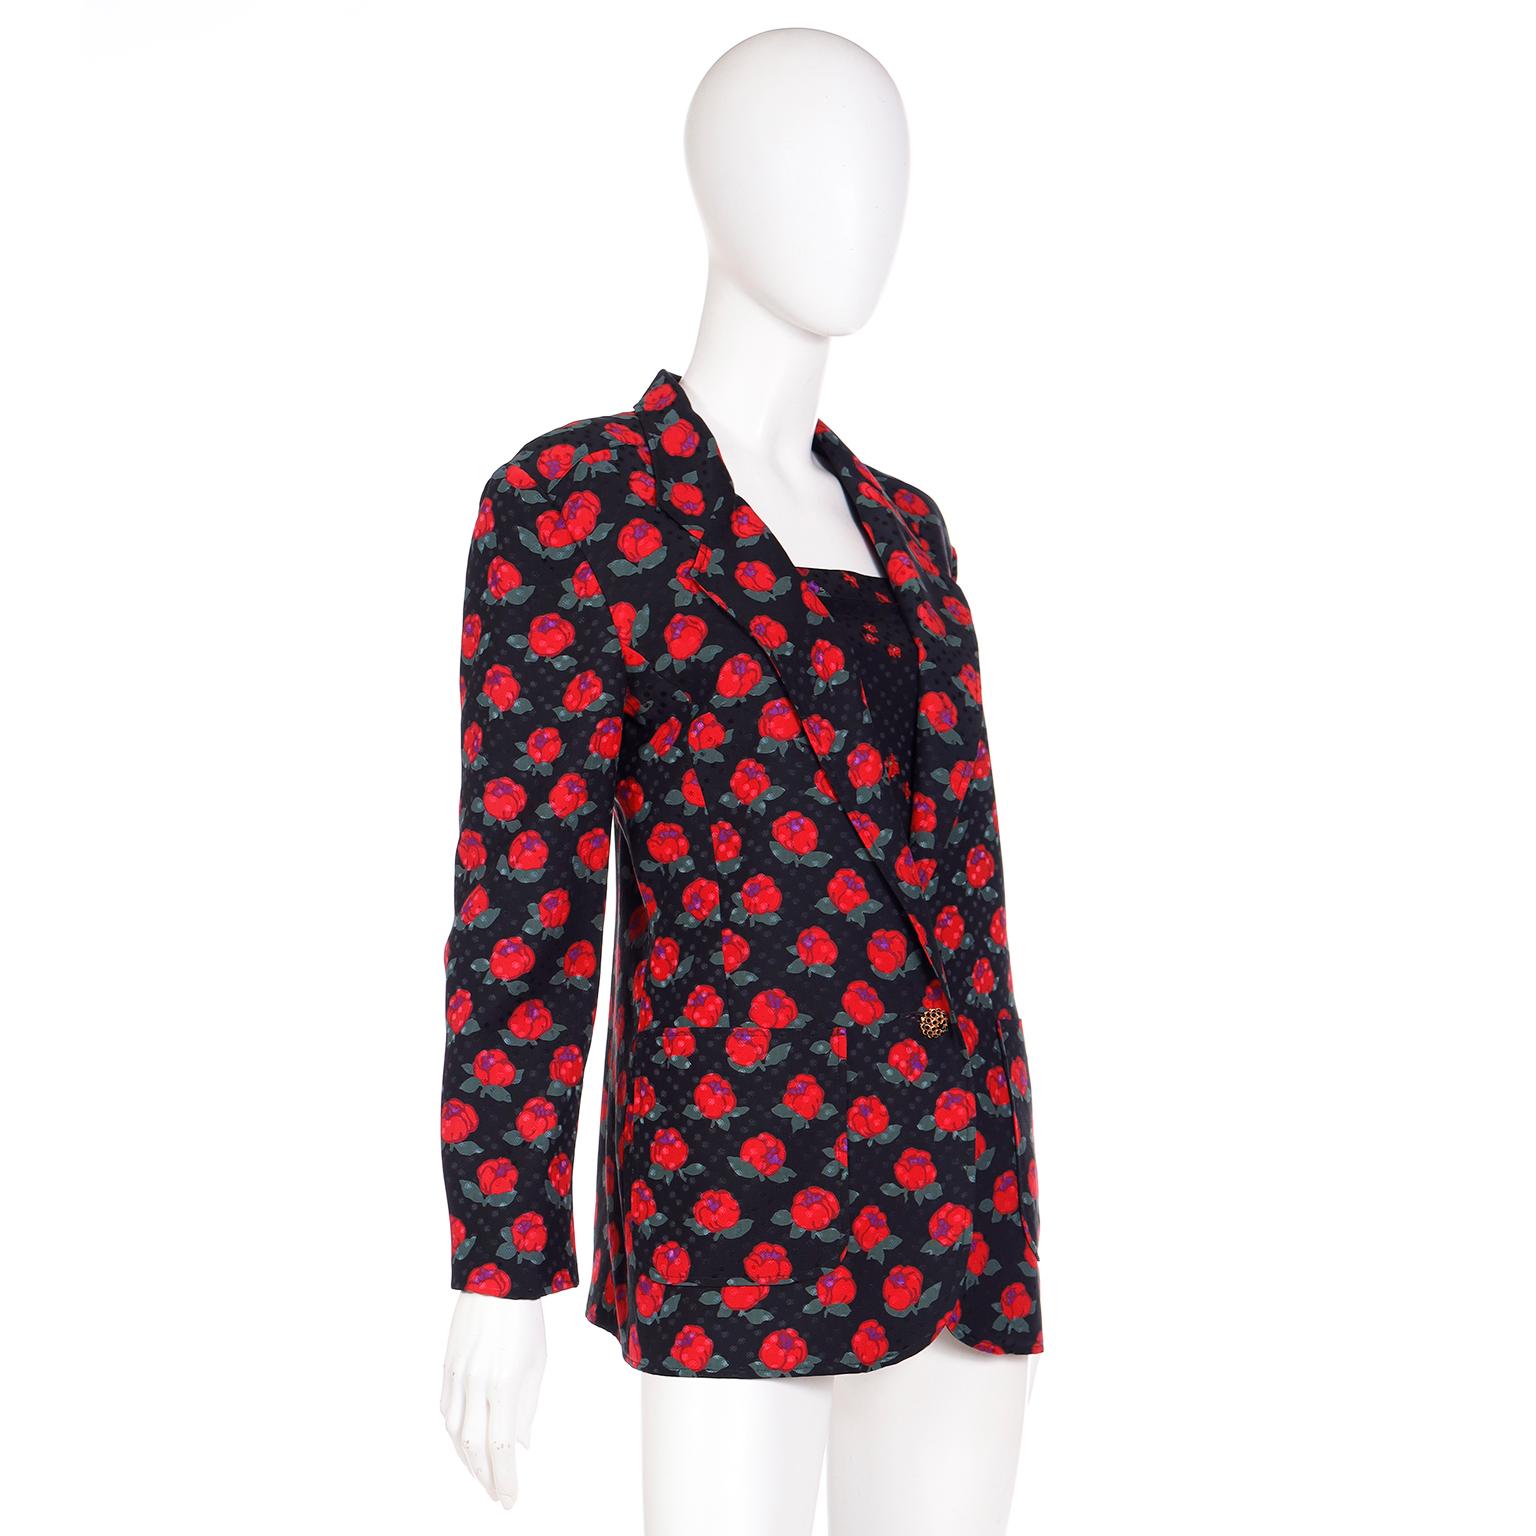 Vintage Louis Feraud  Silk Black and Red Rose Print Jacket and Camisole Top  For Sale 2